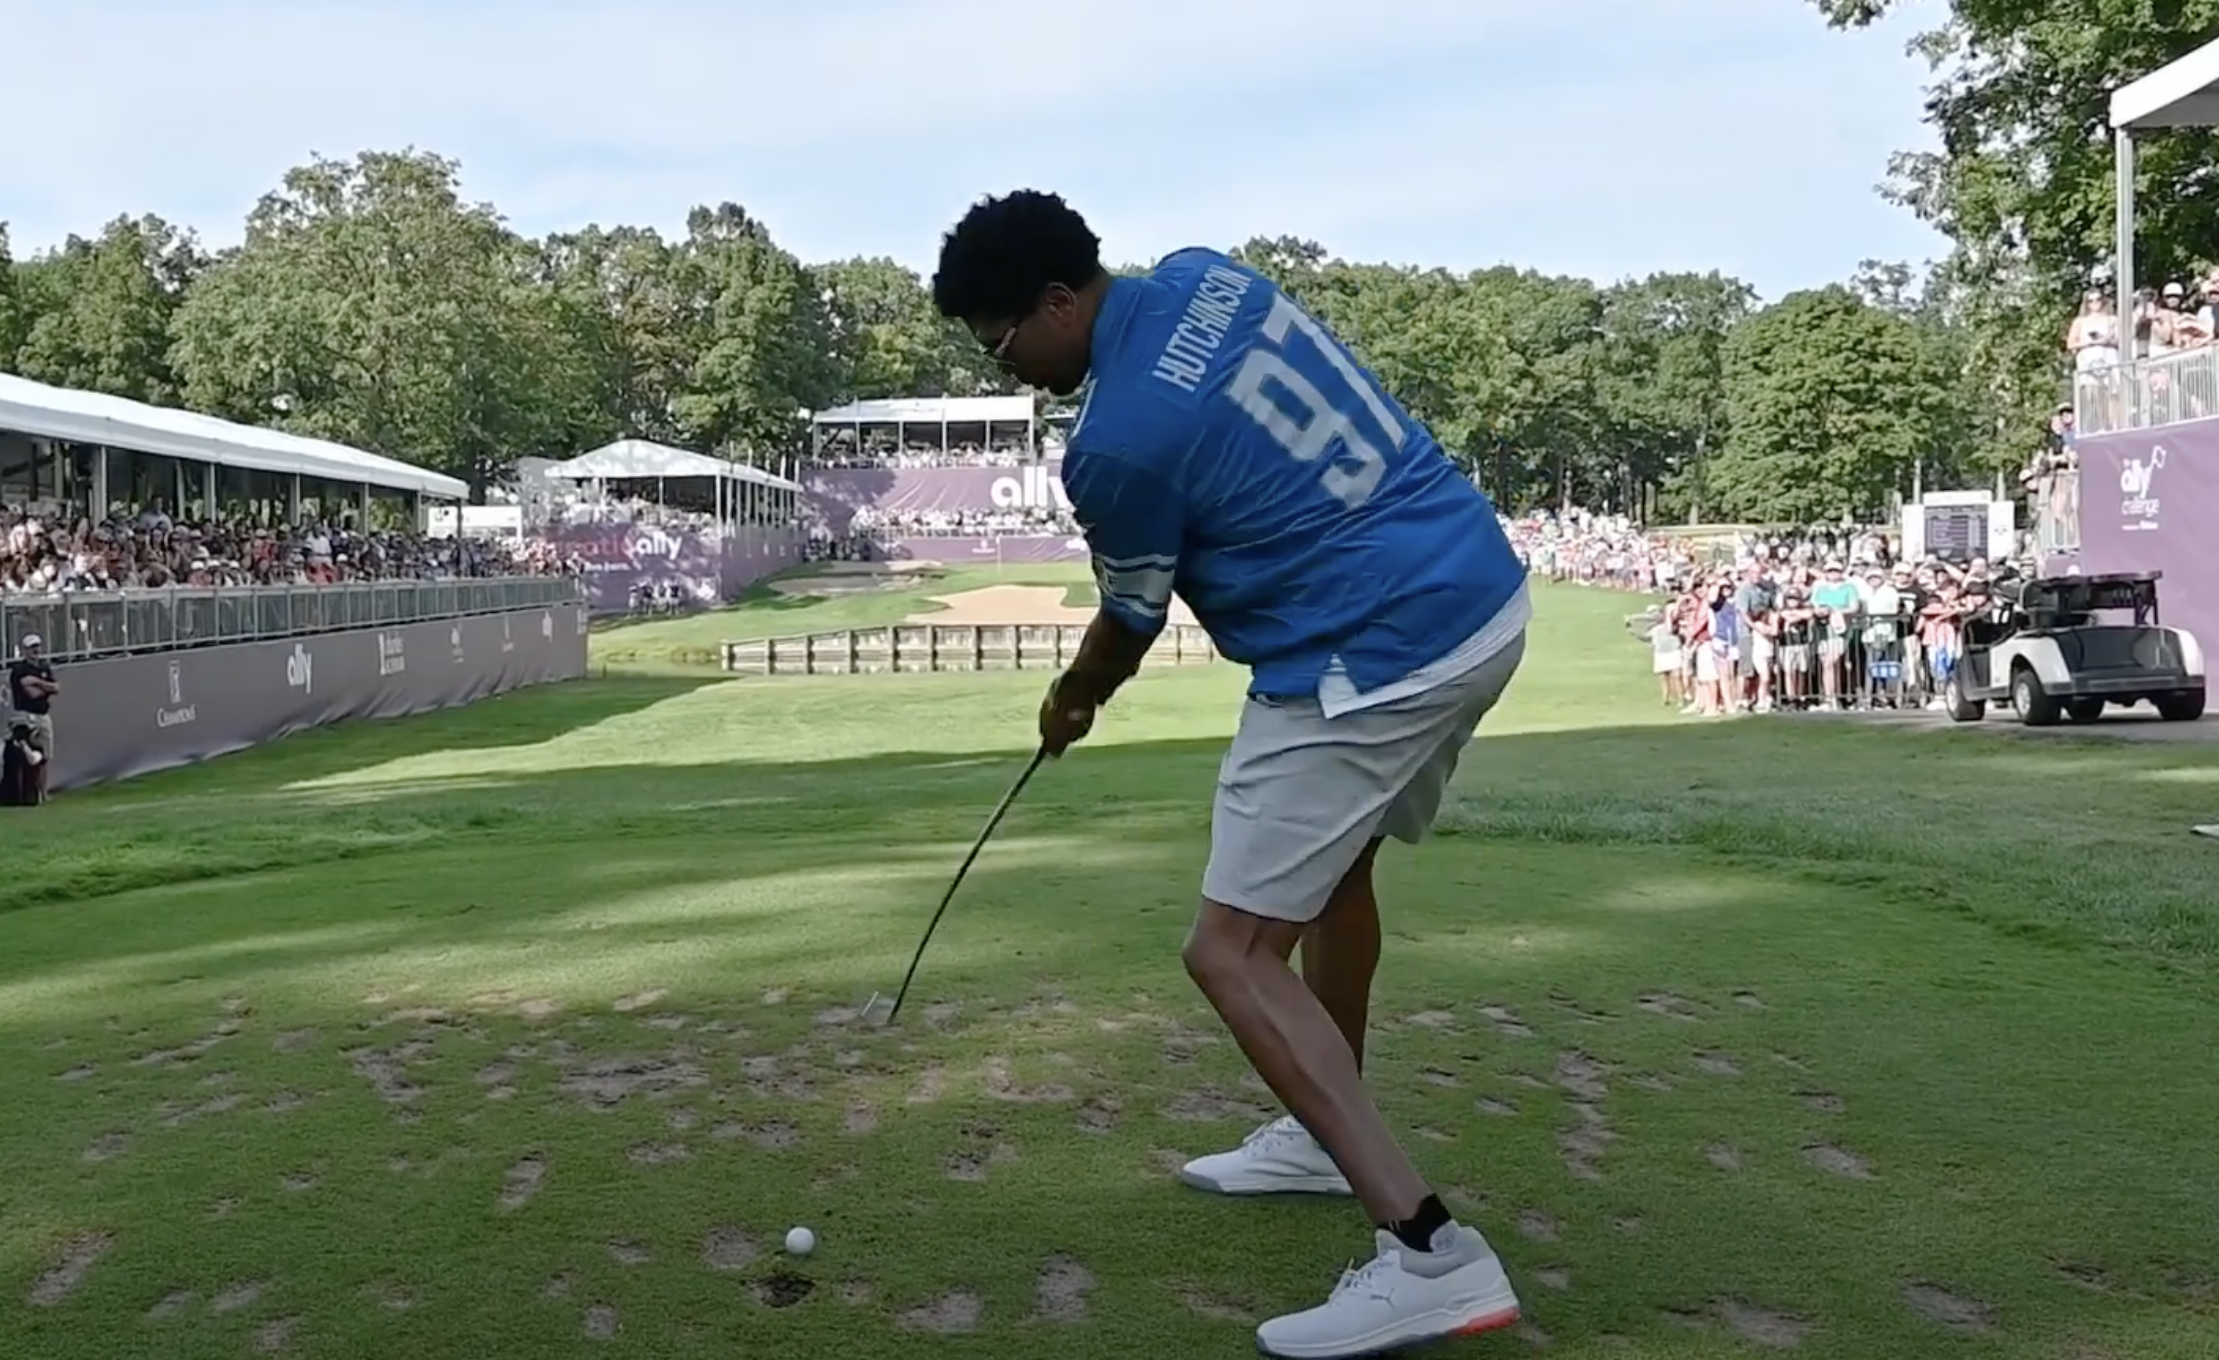 WATCH: ESPN’s Jalen Rose Whiffs Five Straight Times With One of the Most Hilariously Inept Golf Swings You’ll Ever See